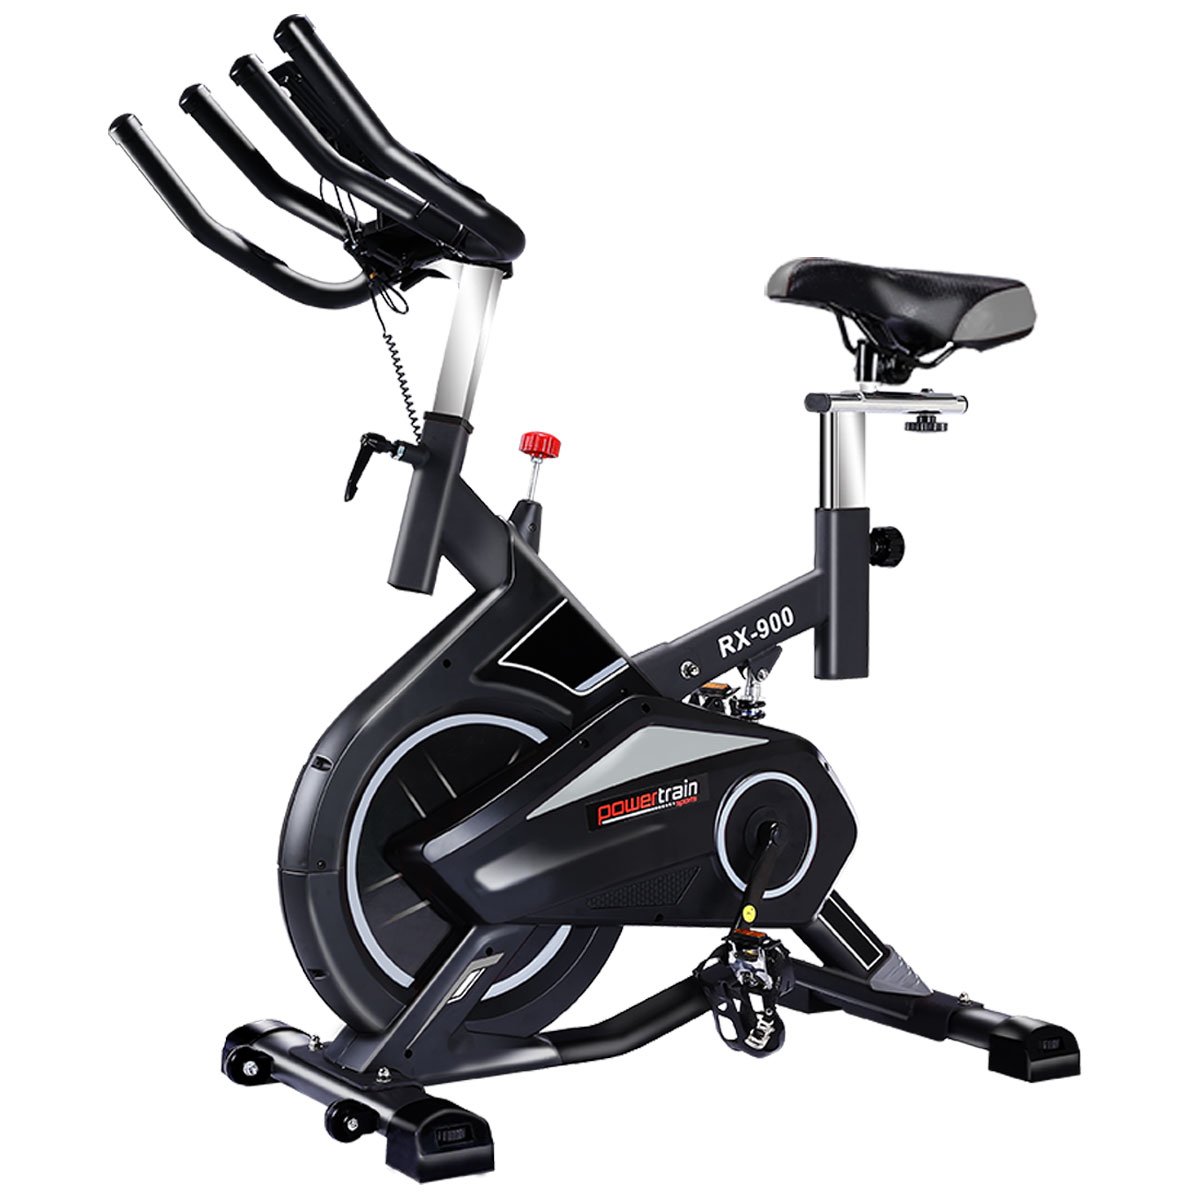 Powertrain RX-900 Exercise Spin Bike Cardio Cycling - Silver - SILBERSHELL